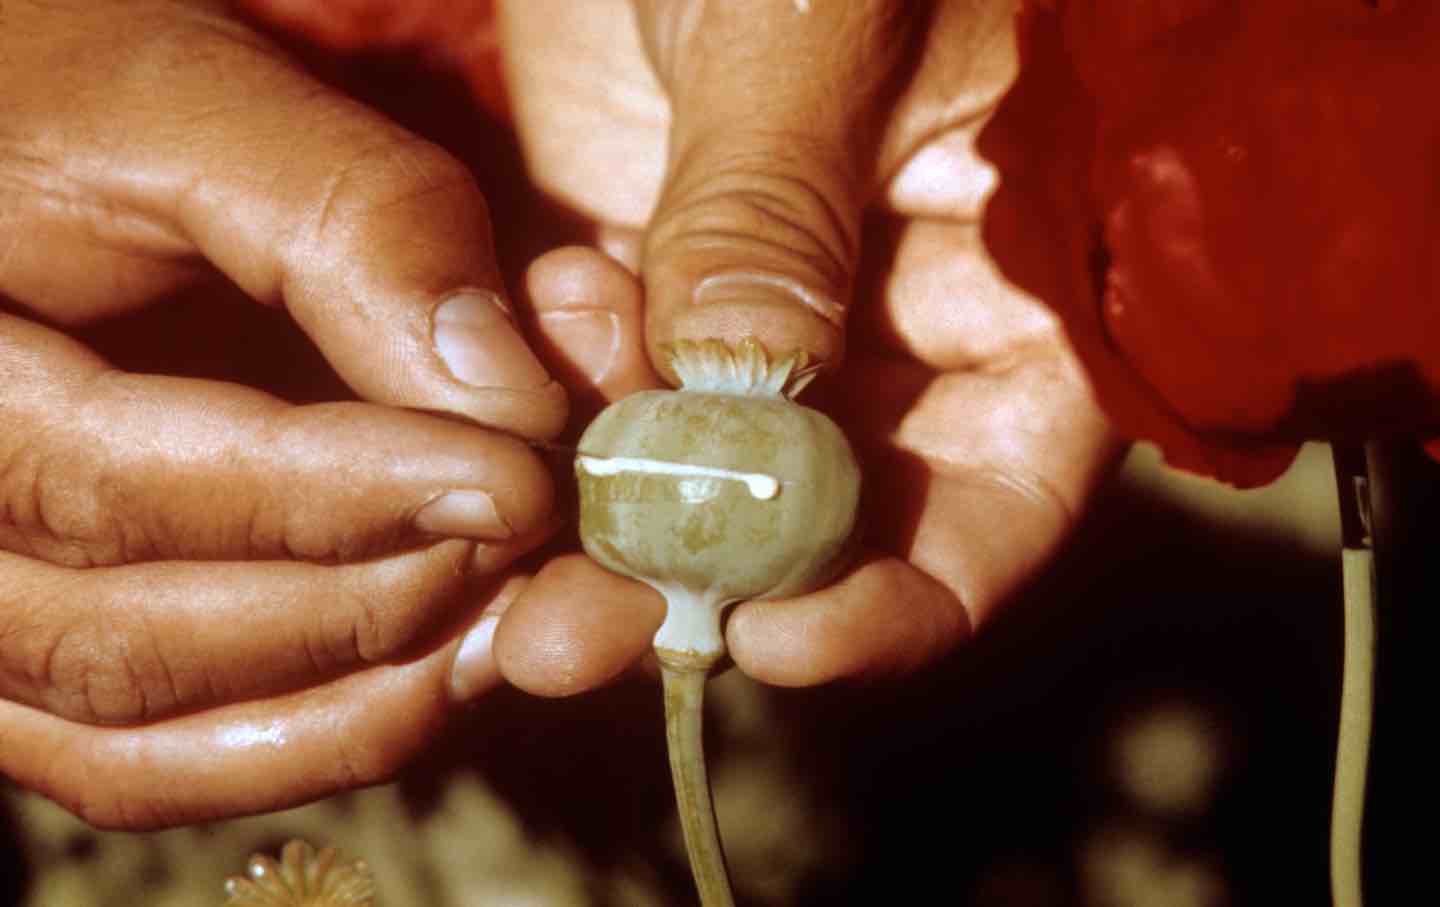 Extracting heroin from poppies on April 10, 1978, in Los Angeles, Calif.